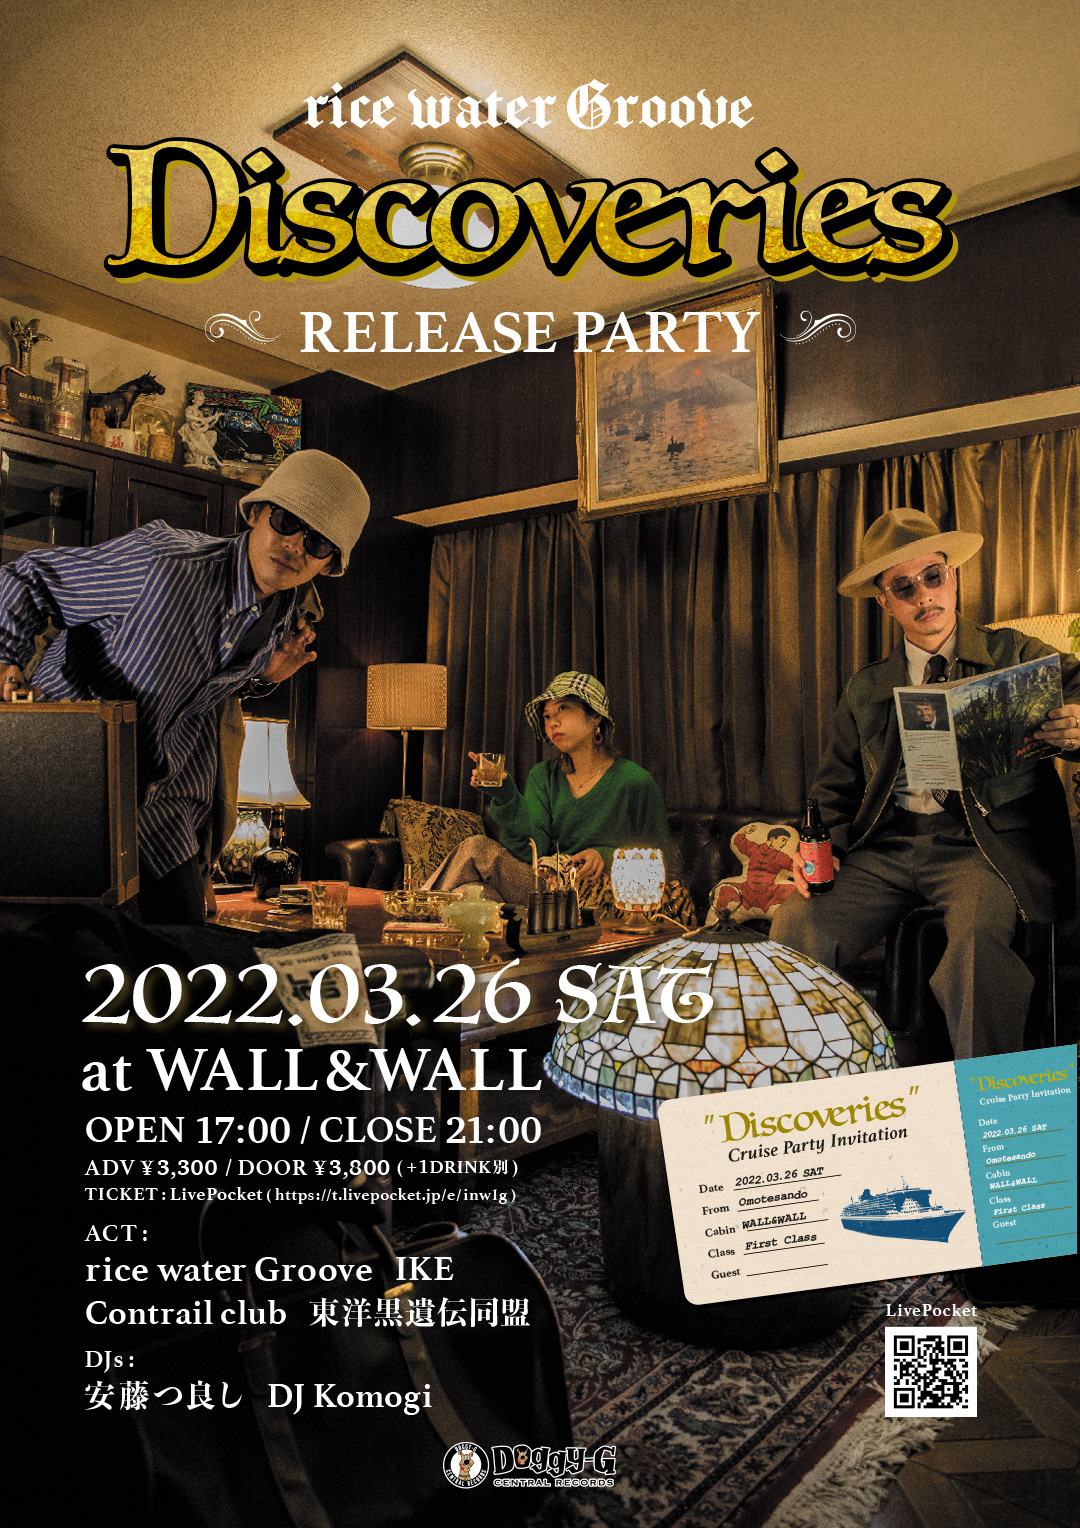 "Discoveries" Release Party